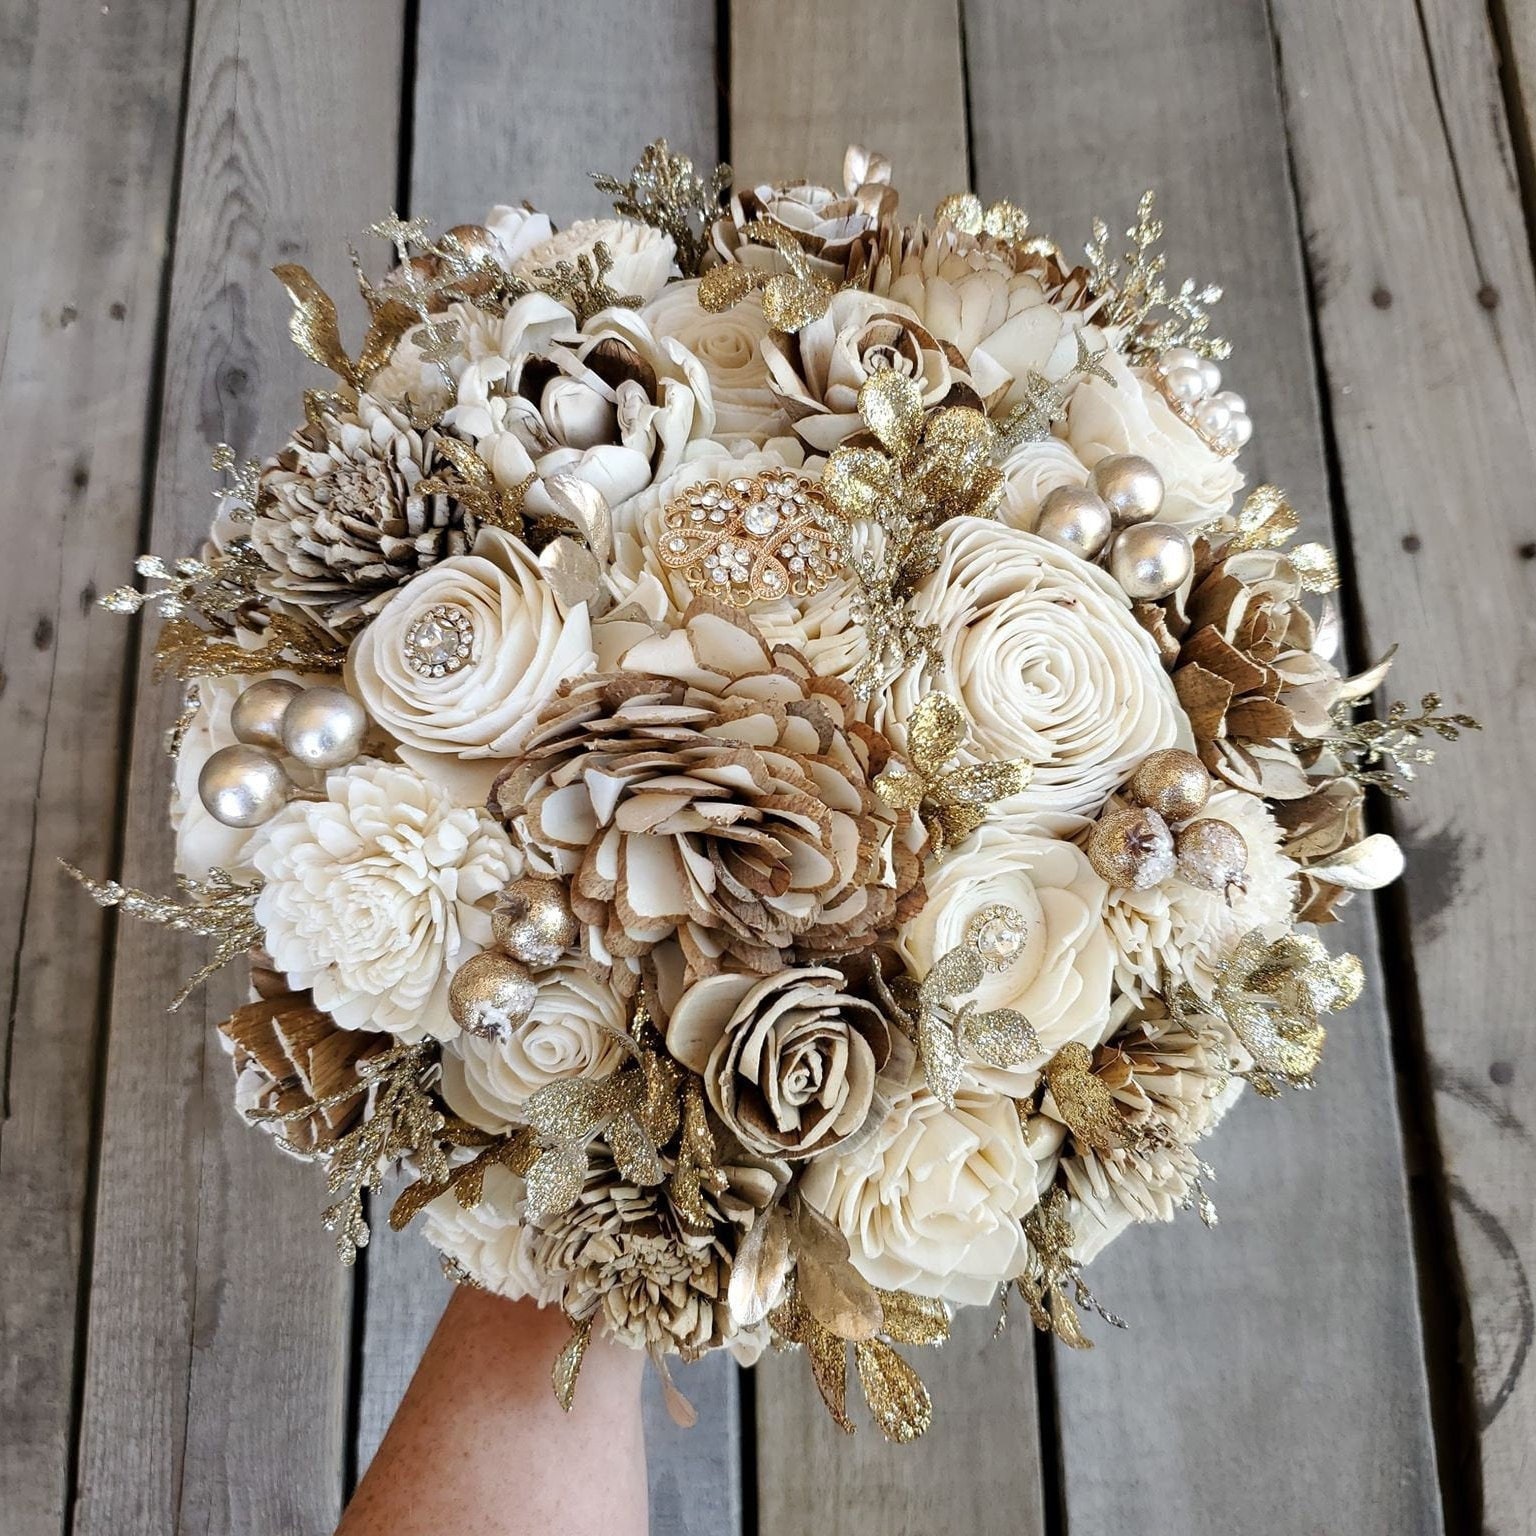 Gold Brooch And Glitter Sola Wood Flower Bouquet With Cream And Natural